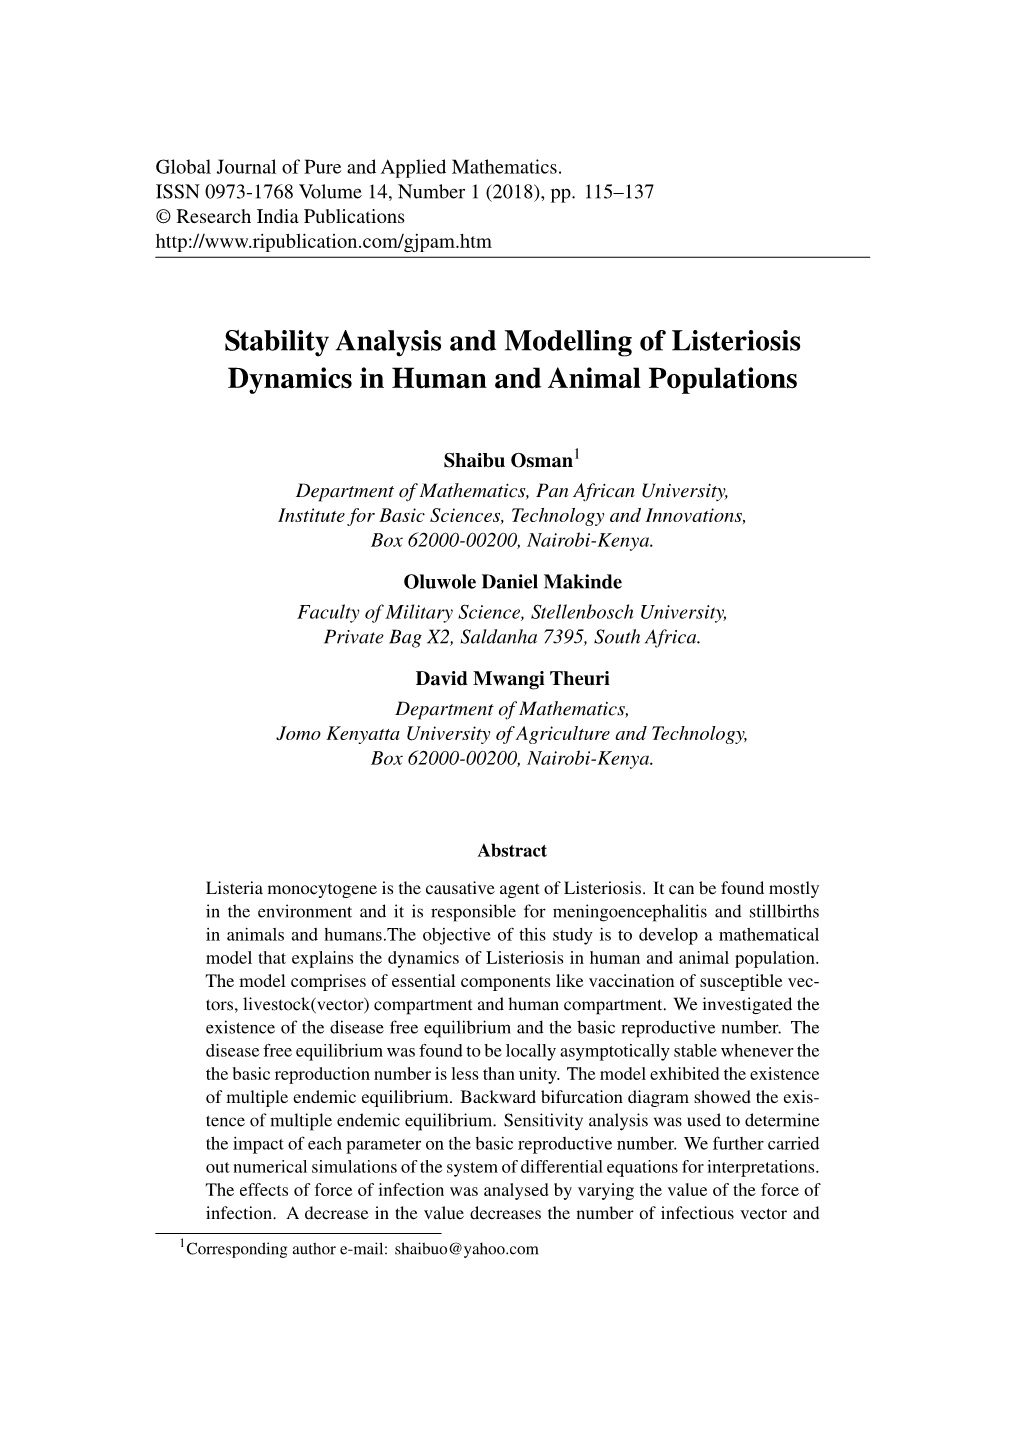 Stability Analysis and Modelling of Listeriosis Dynamics in Human and Animal Populations